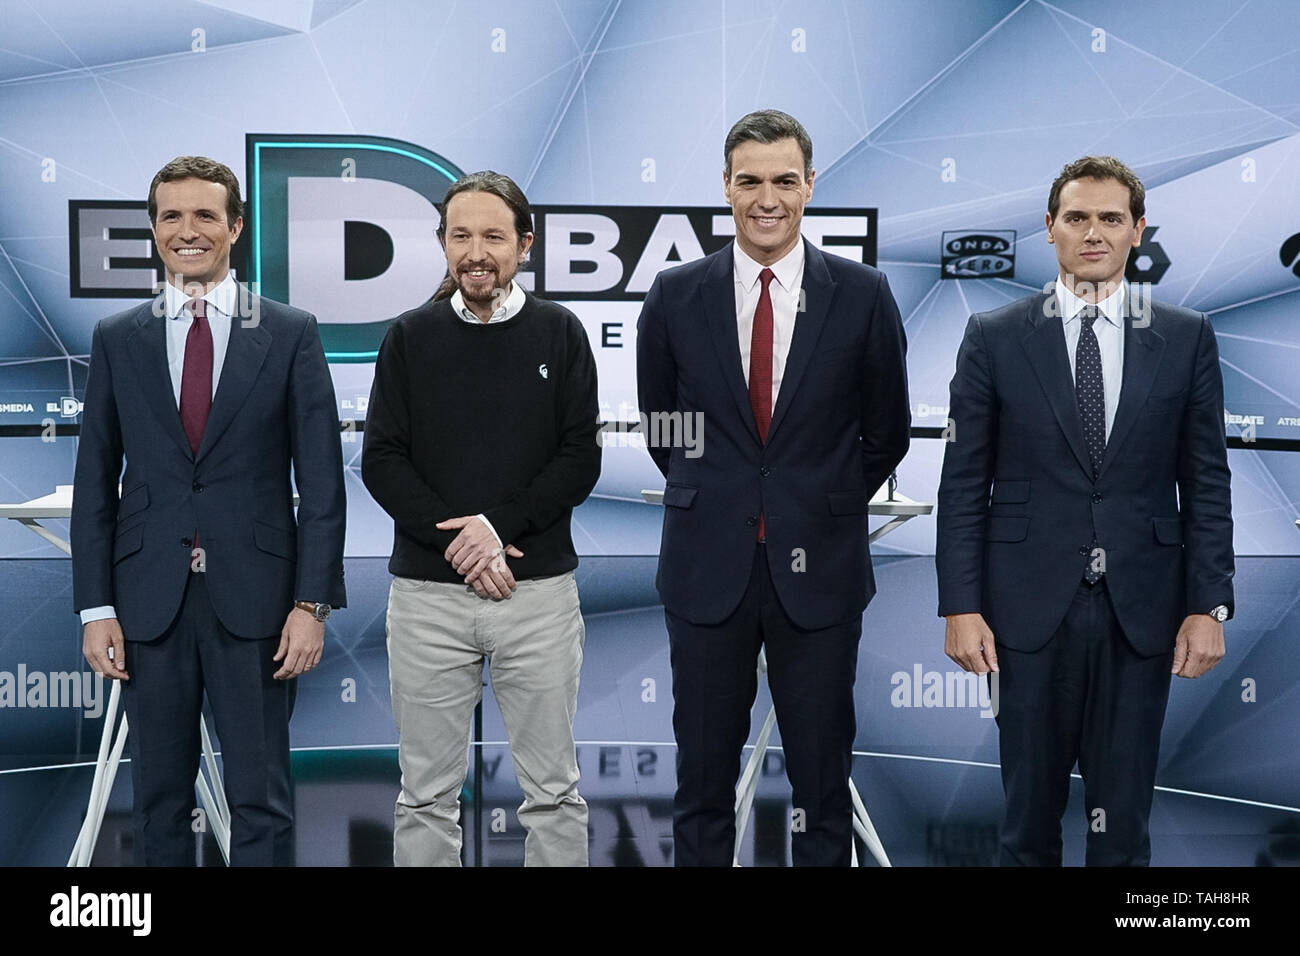 Spanish conservative Popular Party (PP) leader Pablo Casado, far-left Podemos party leader Pablo Iglesias, Prime Minister and PSOE candidate Pedro Sanchez and centre-right Ciudadanos (Citizens) leader Albert Rivera pose before a televised debate in Madrid on April 23, 2019 ahead of this weekend's general election.  Featuring: Pablo Casado, Pablo Iglesias, Pedro Sanchez, Albert Rivera Where: Madrid, Spain When: 23 Apr 2019 Credit: Oscar Gonzalez/WENN.com Stock Photo